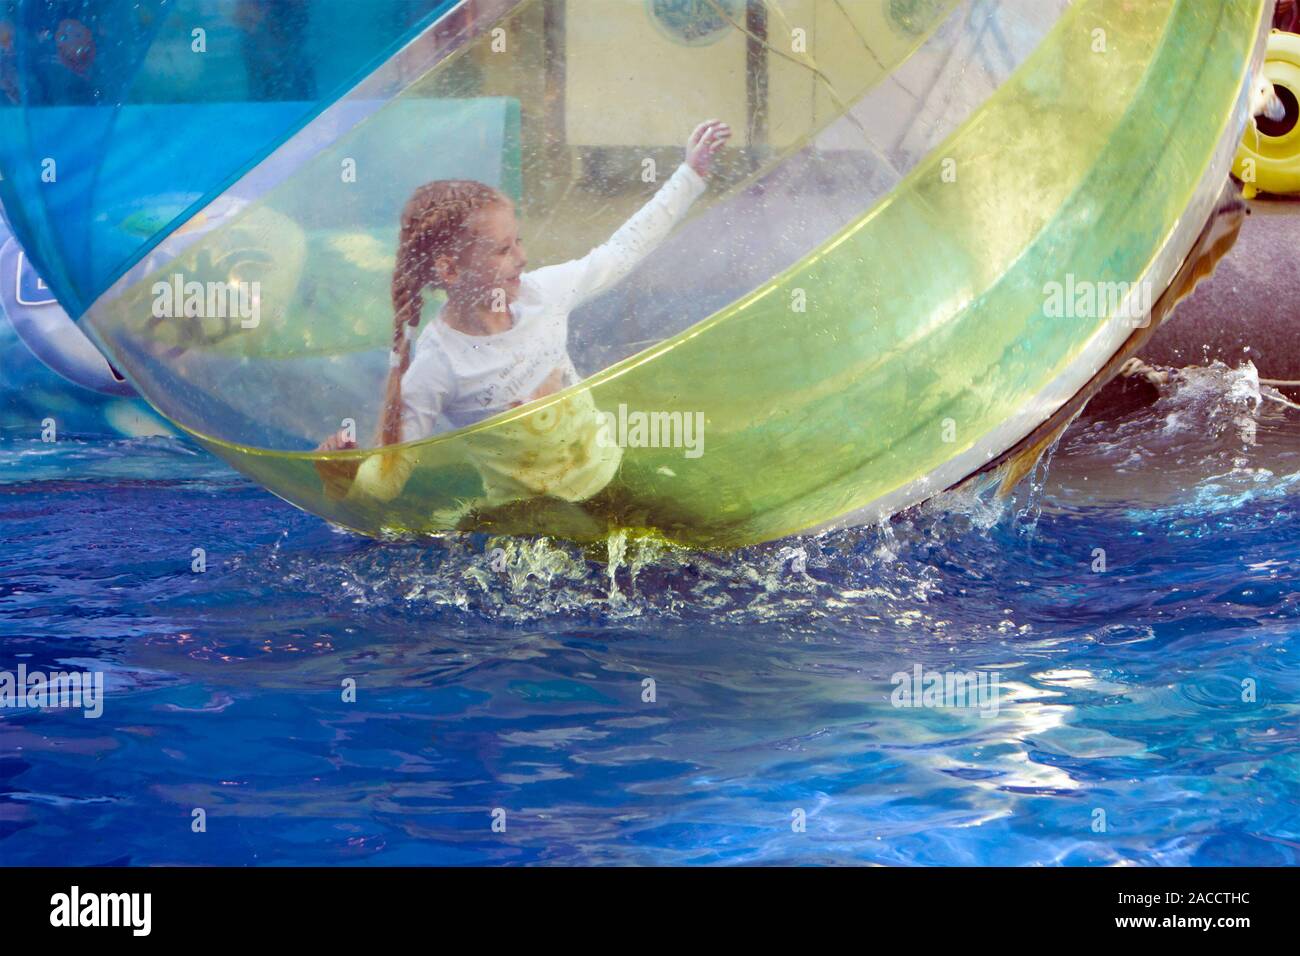 Saint-Petersburg, Russia, April 27, 2019. Little girl playing inside the big transparent water bubble in swimming pool Stock Photo